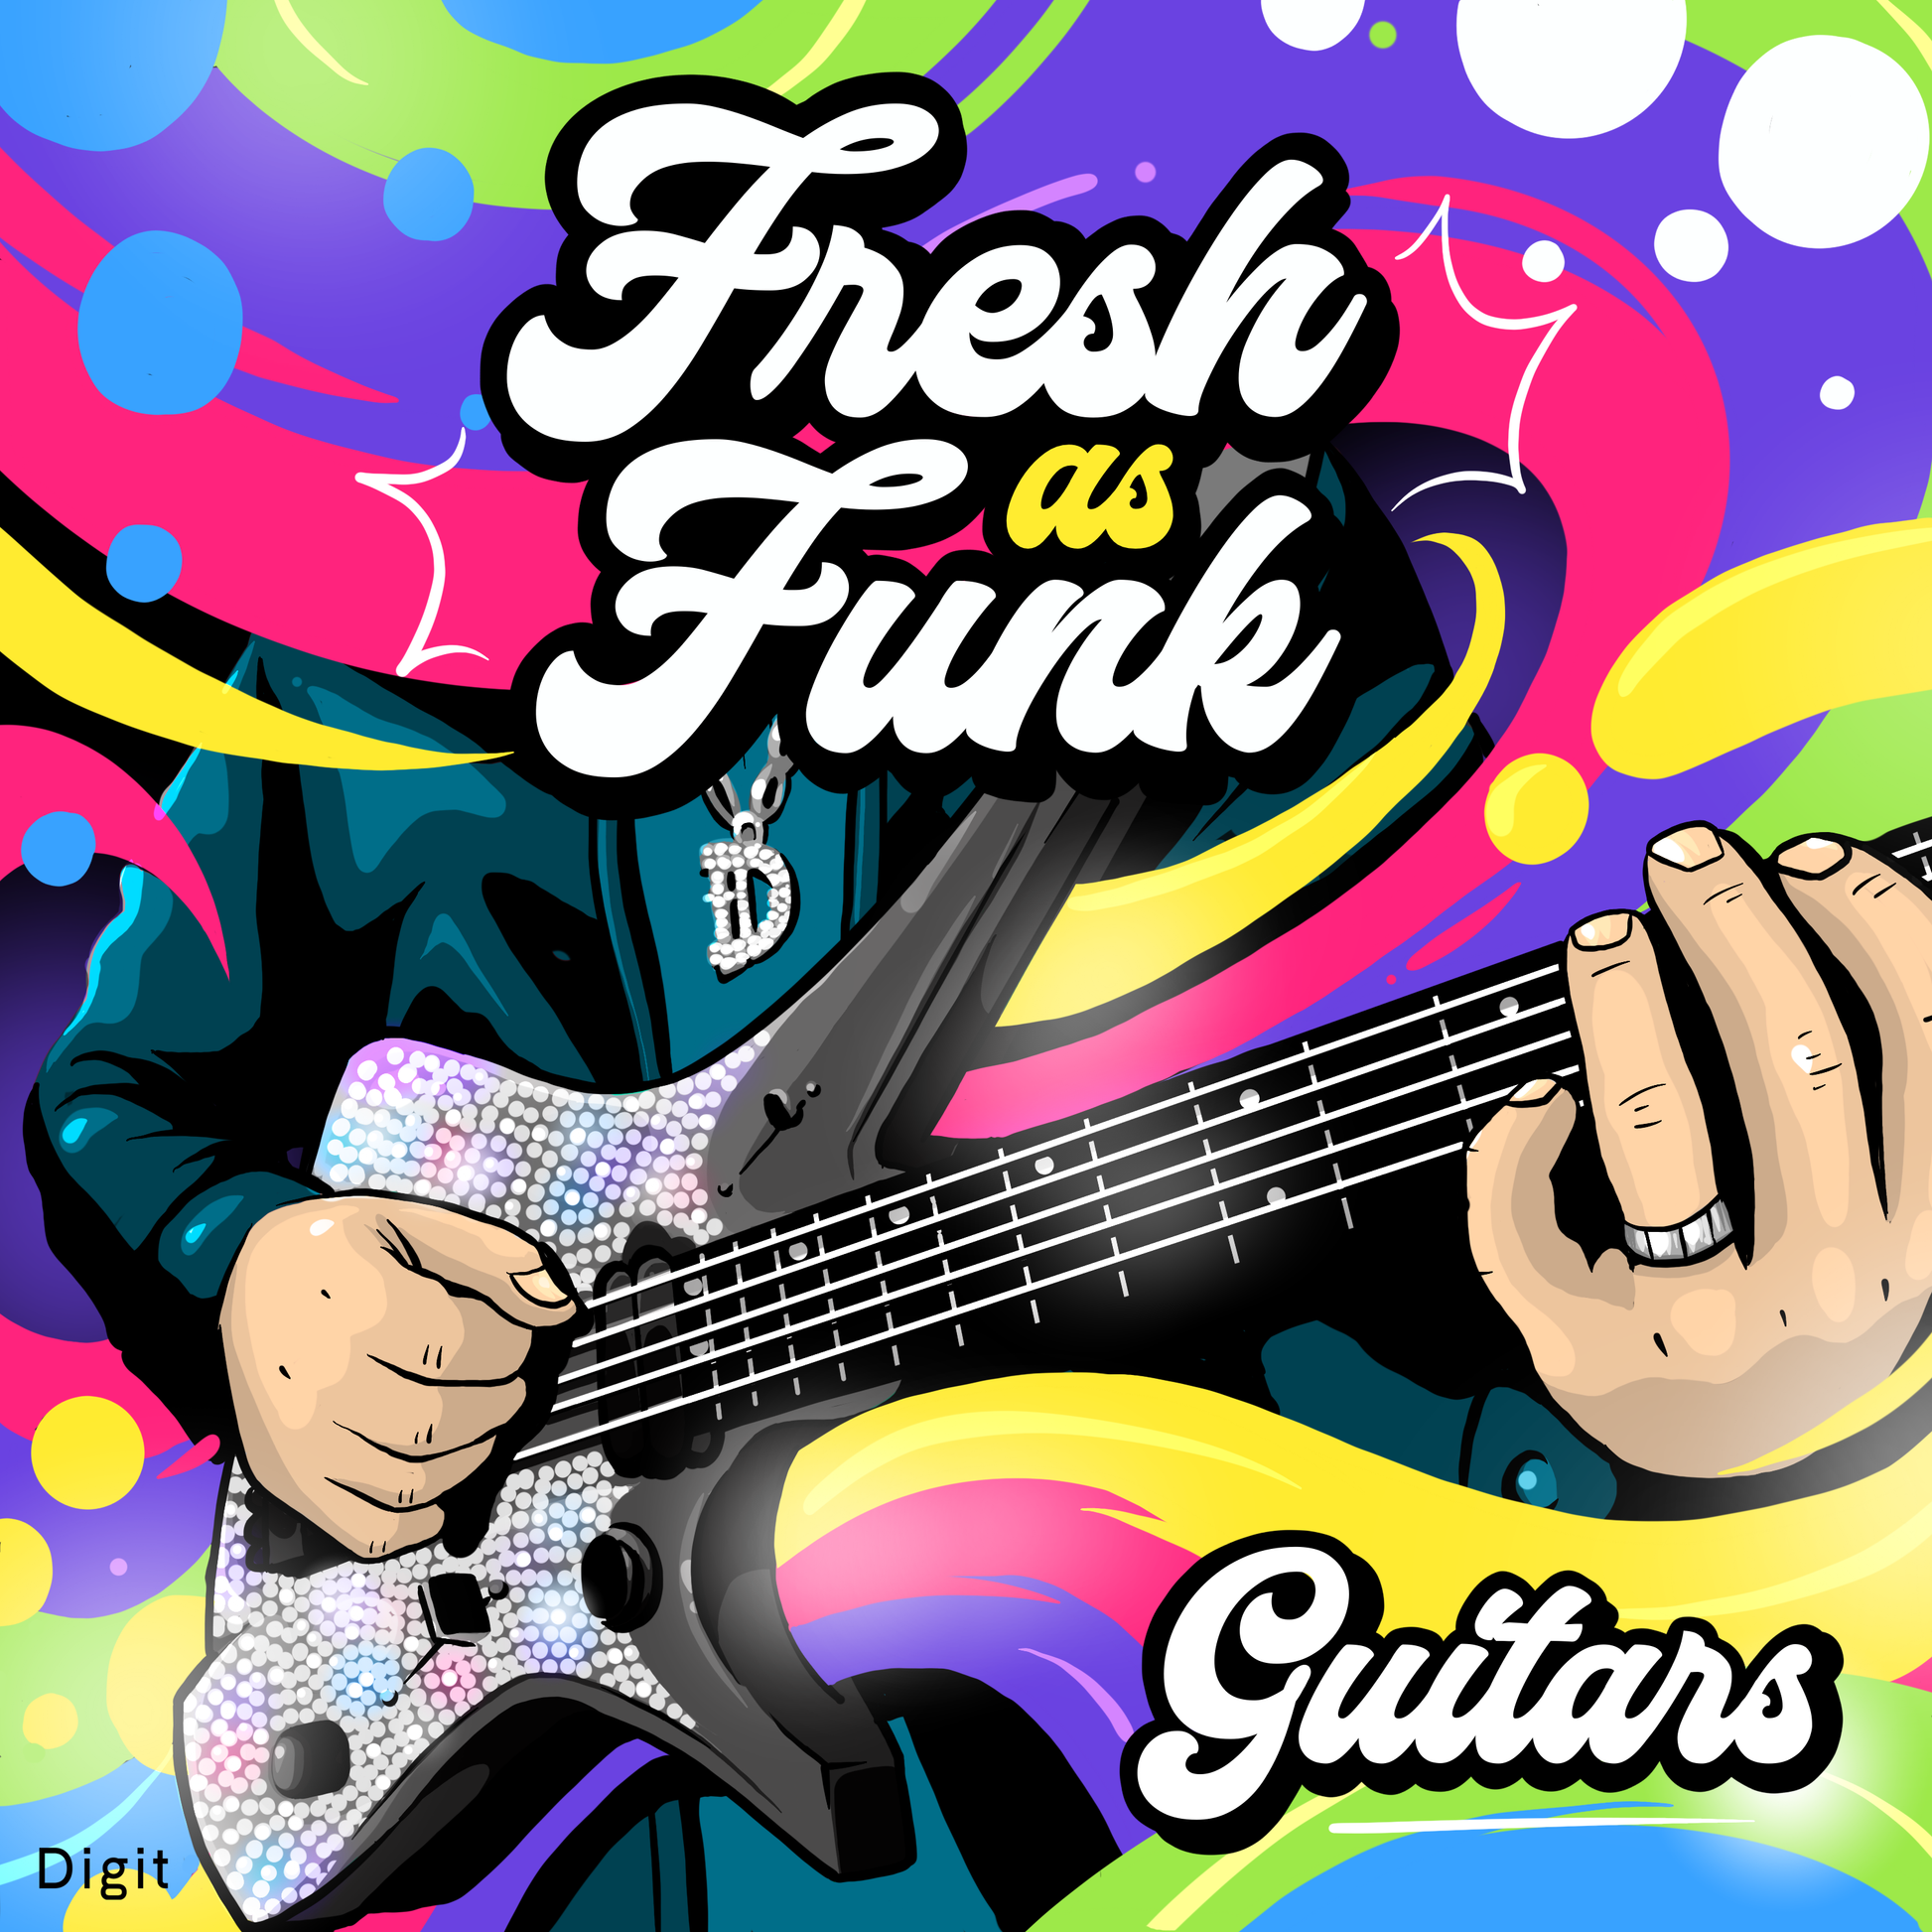 A cartoon of a man playing a jewel encrusted bass guitar in front of a colourful 70s inspired background.